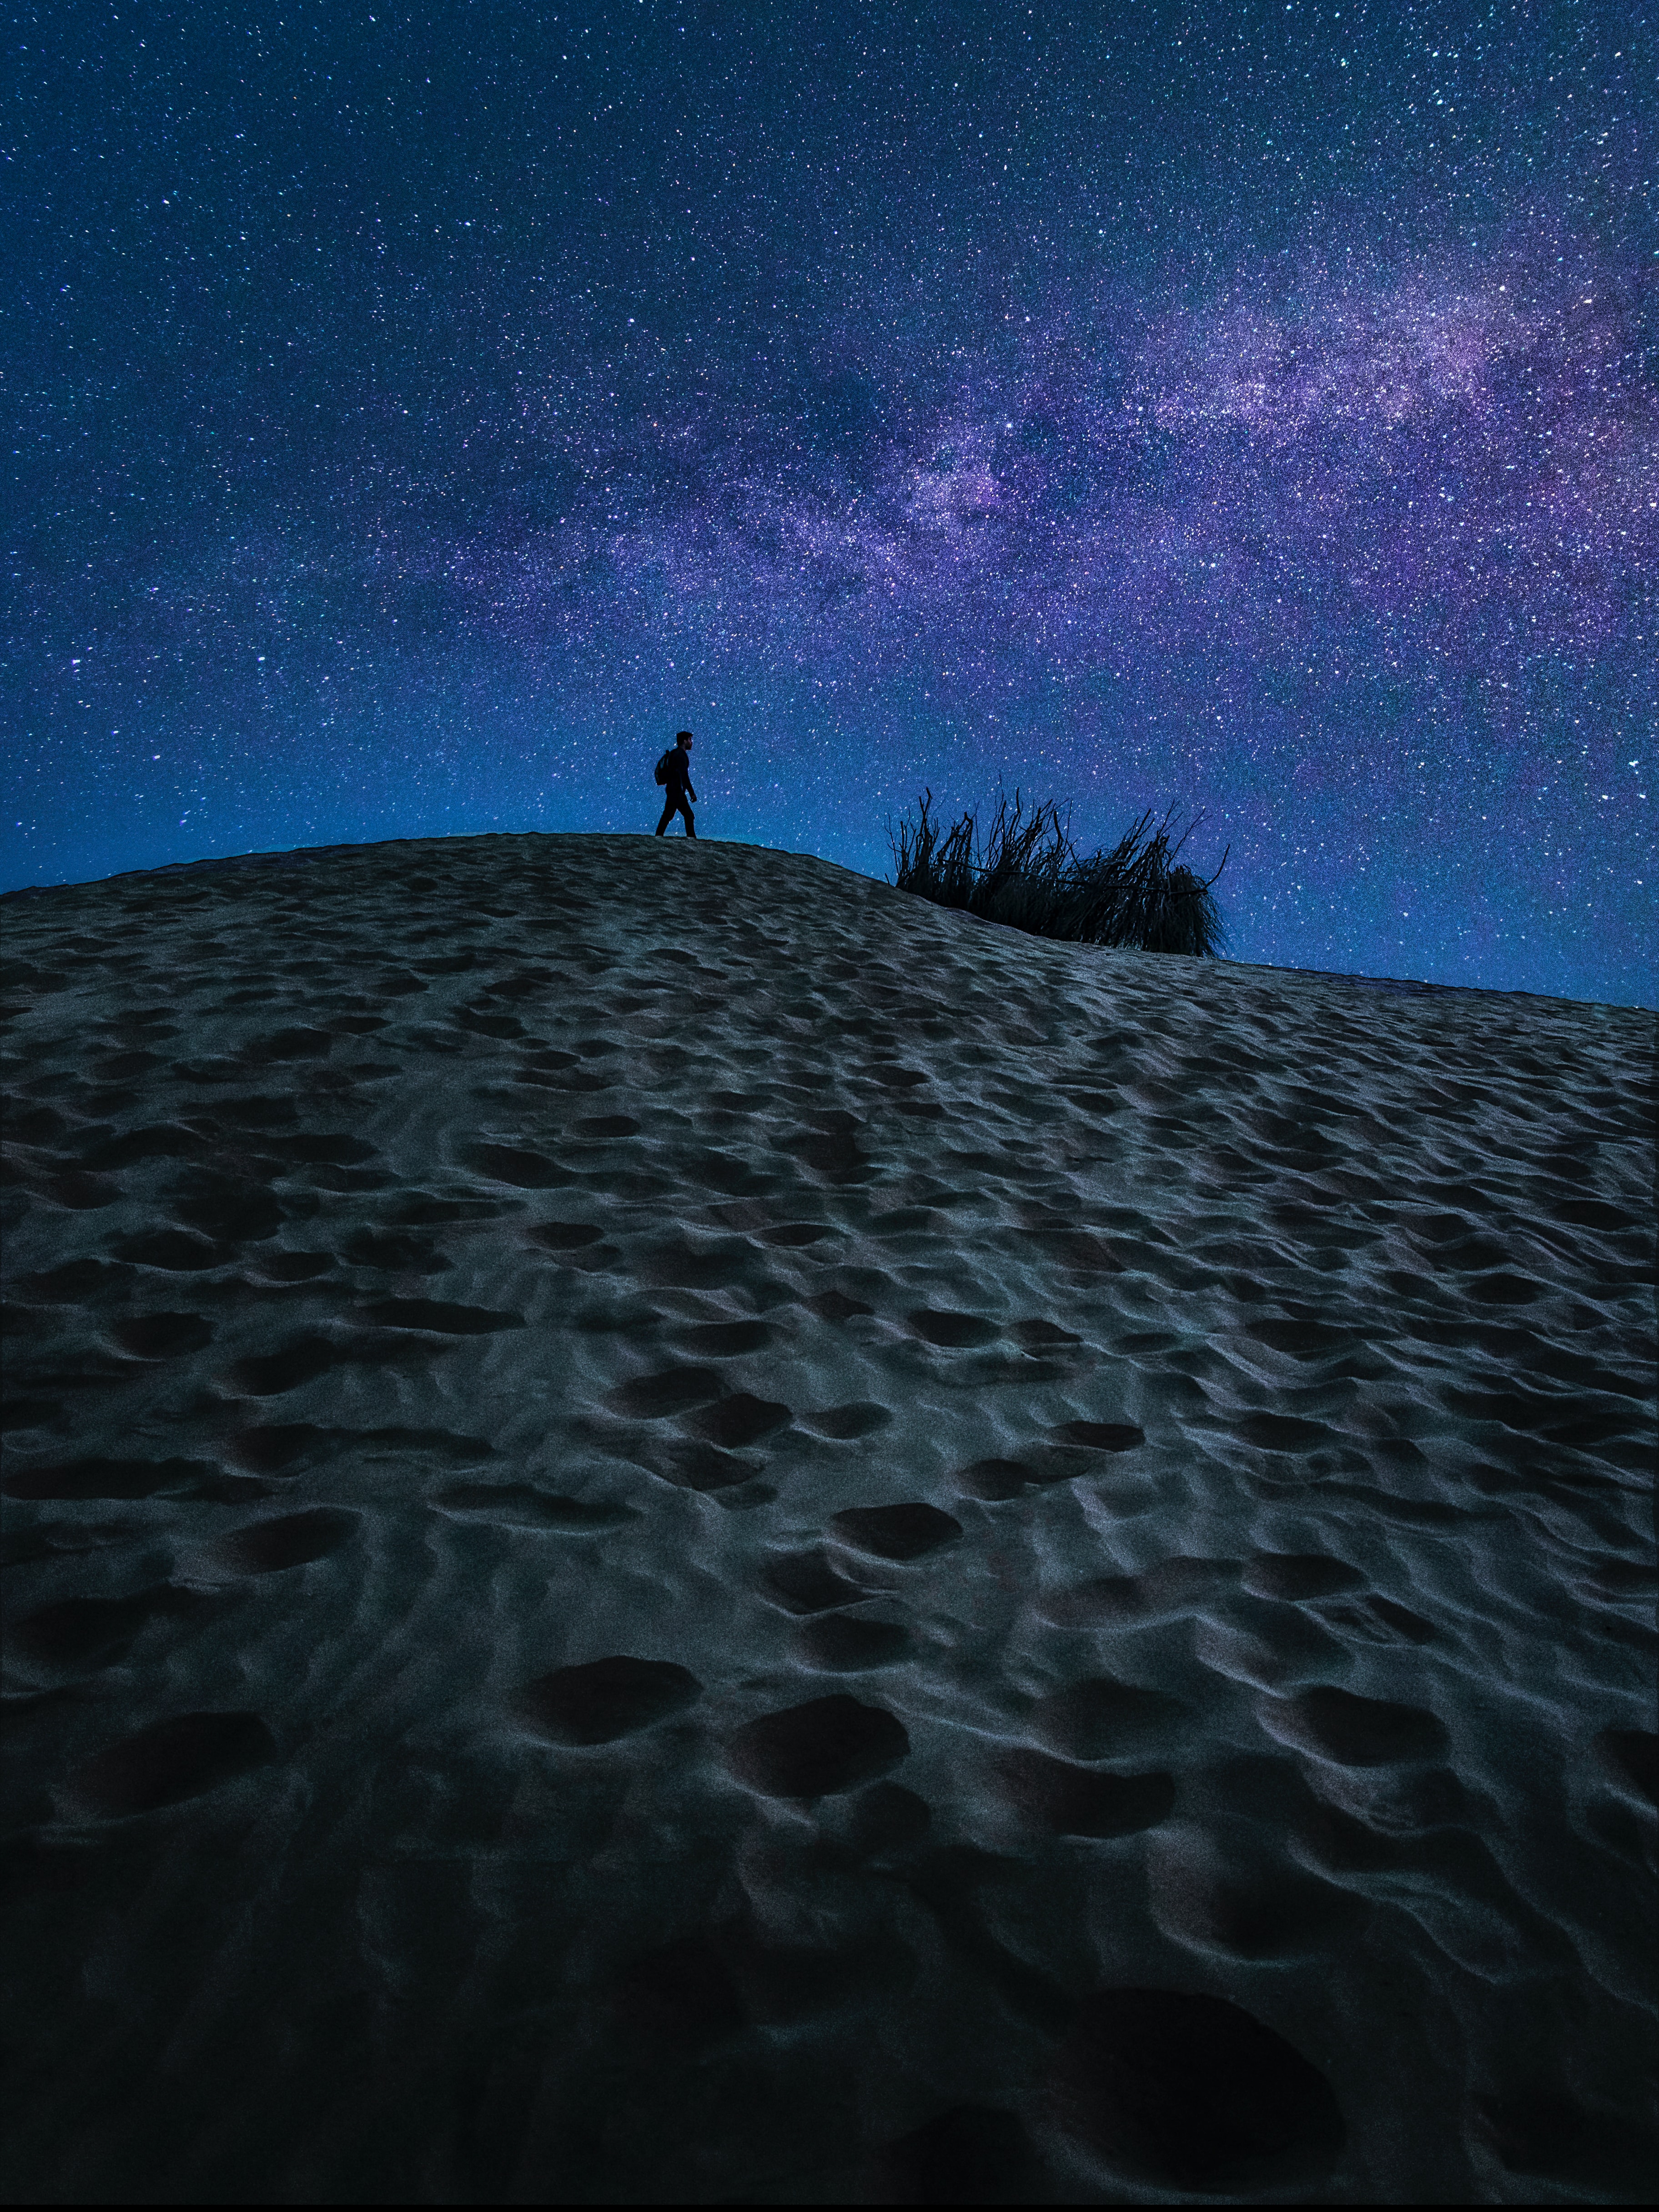 human, alone, sand, miscellanea, miscellaneous, starry sky, person, loneliness, lonely High Definition image